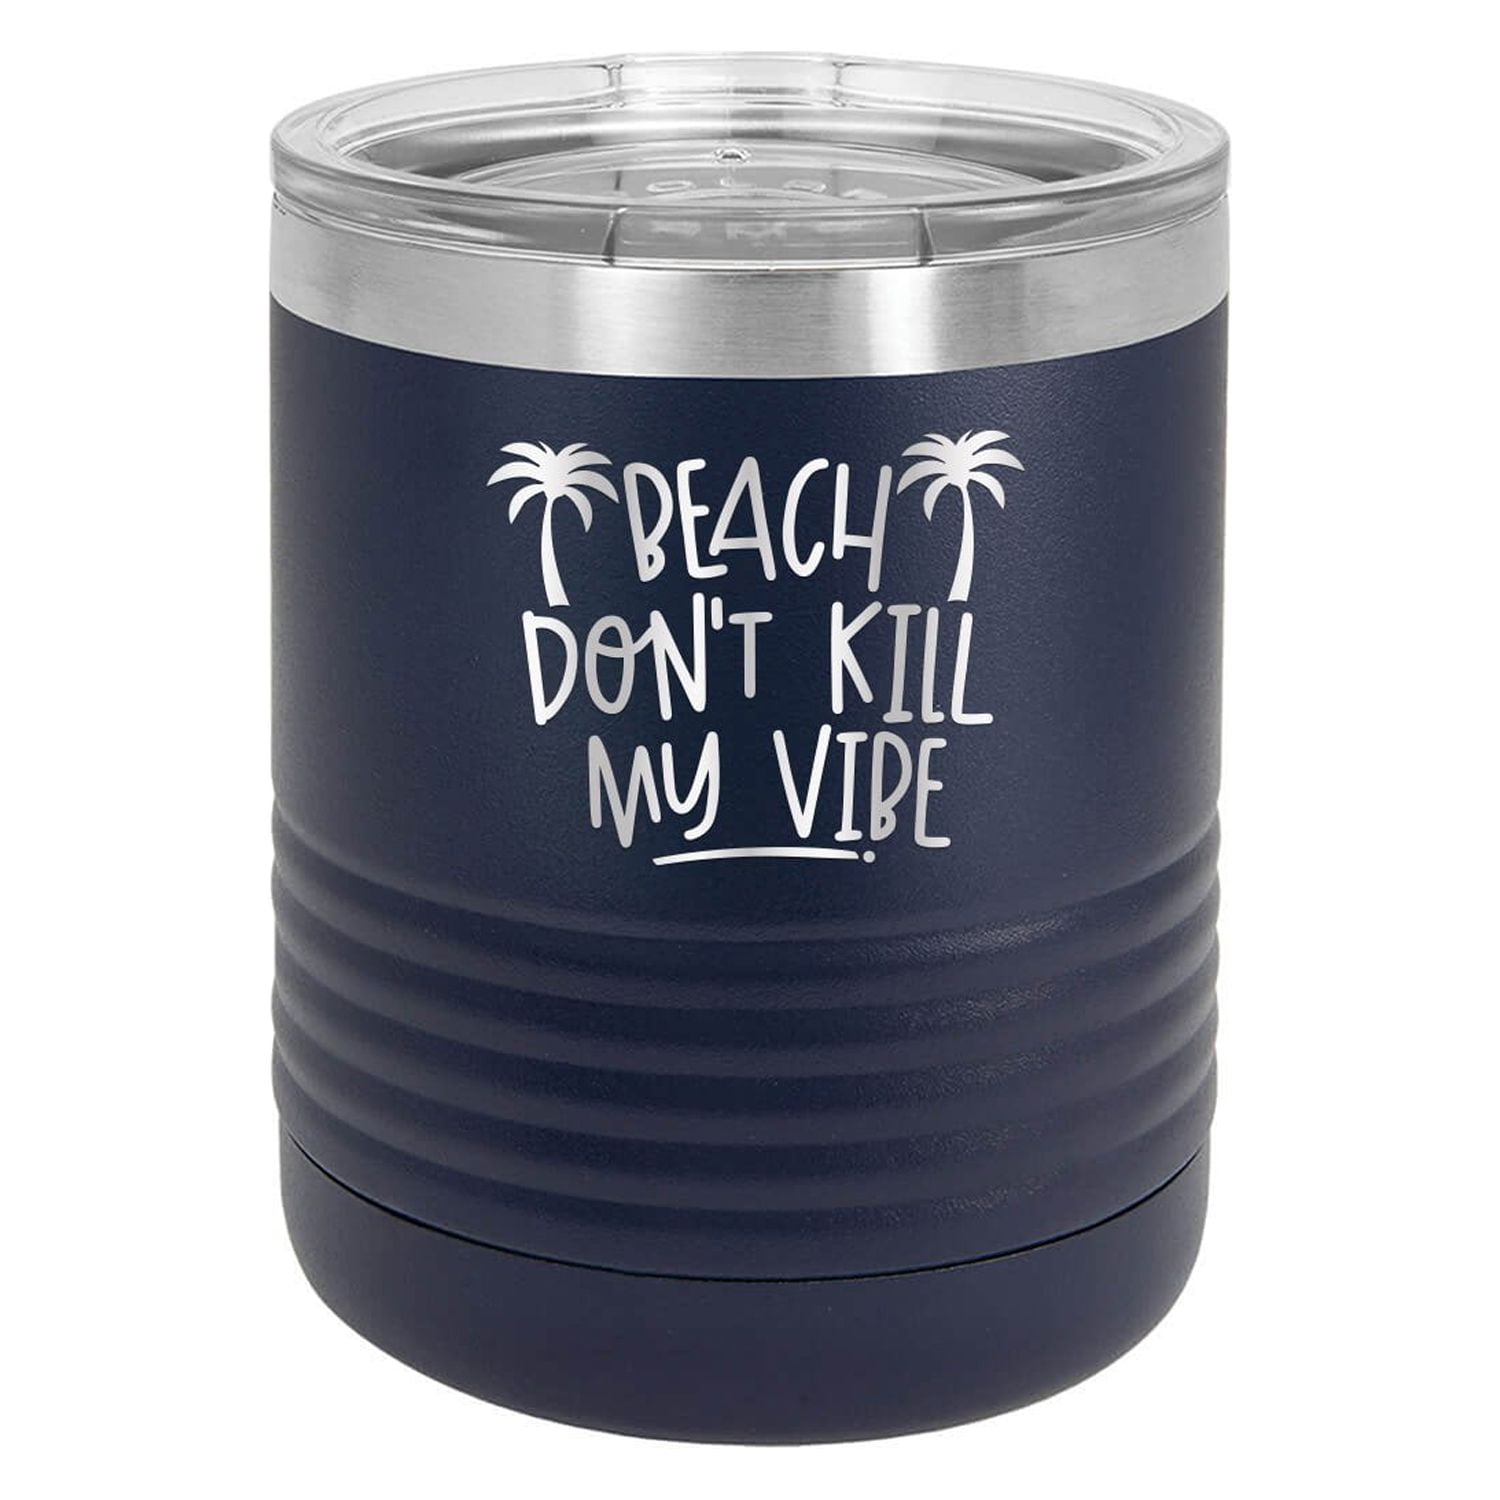 Beach Don't Kill My Vibe - Engraved 10 oz Tumbler Cup Unique